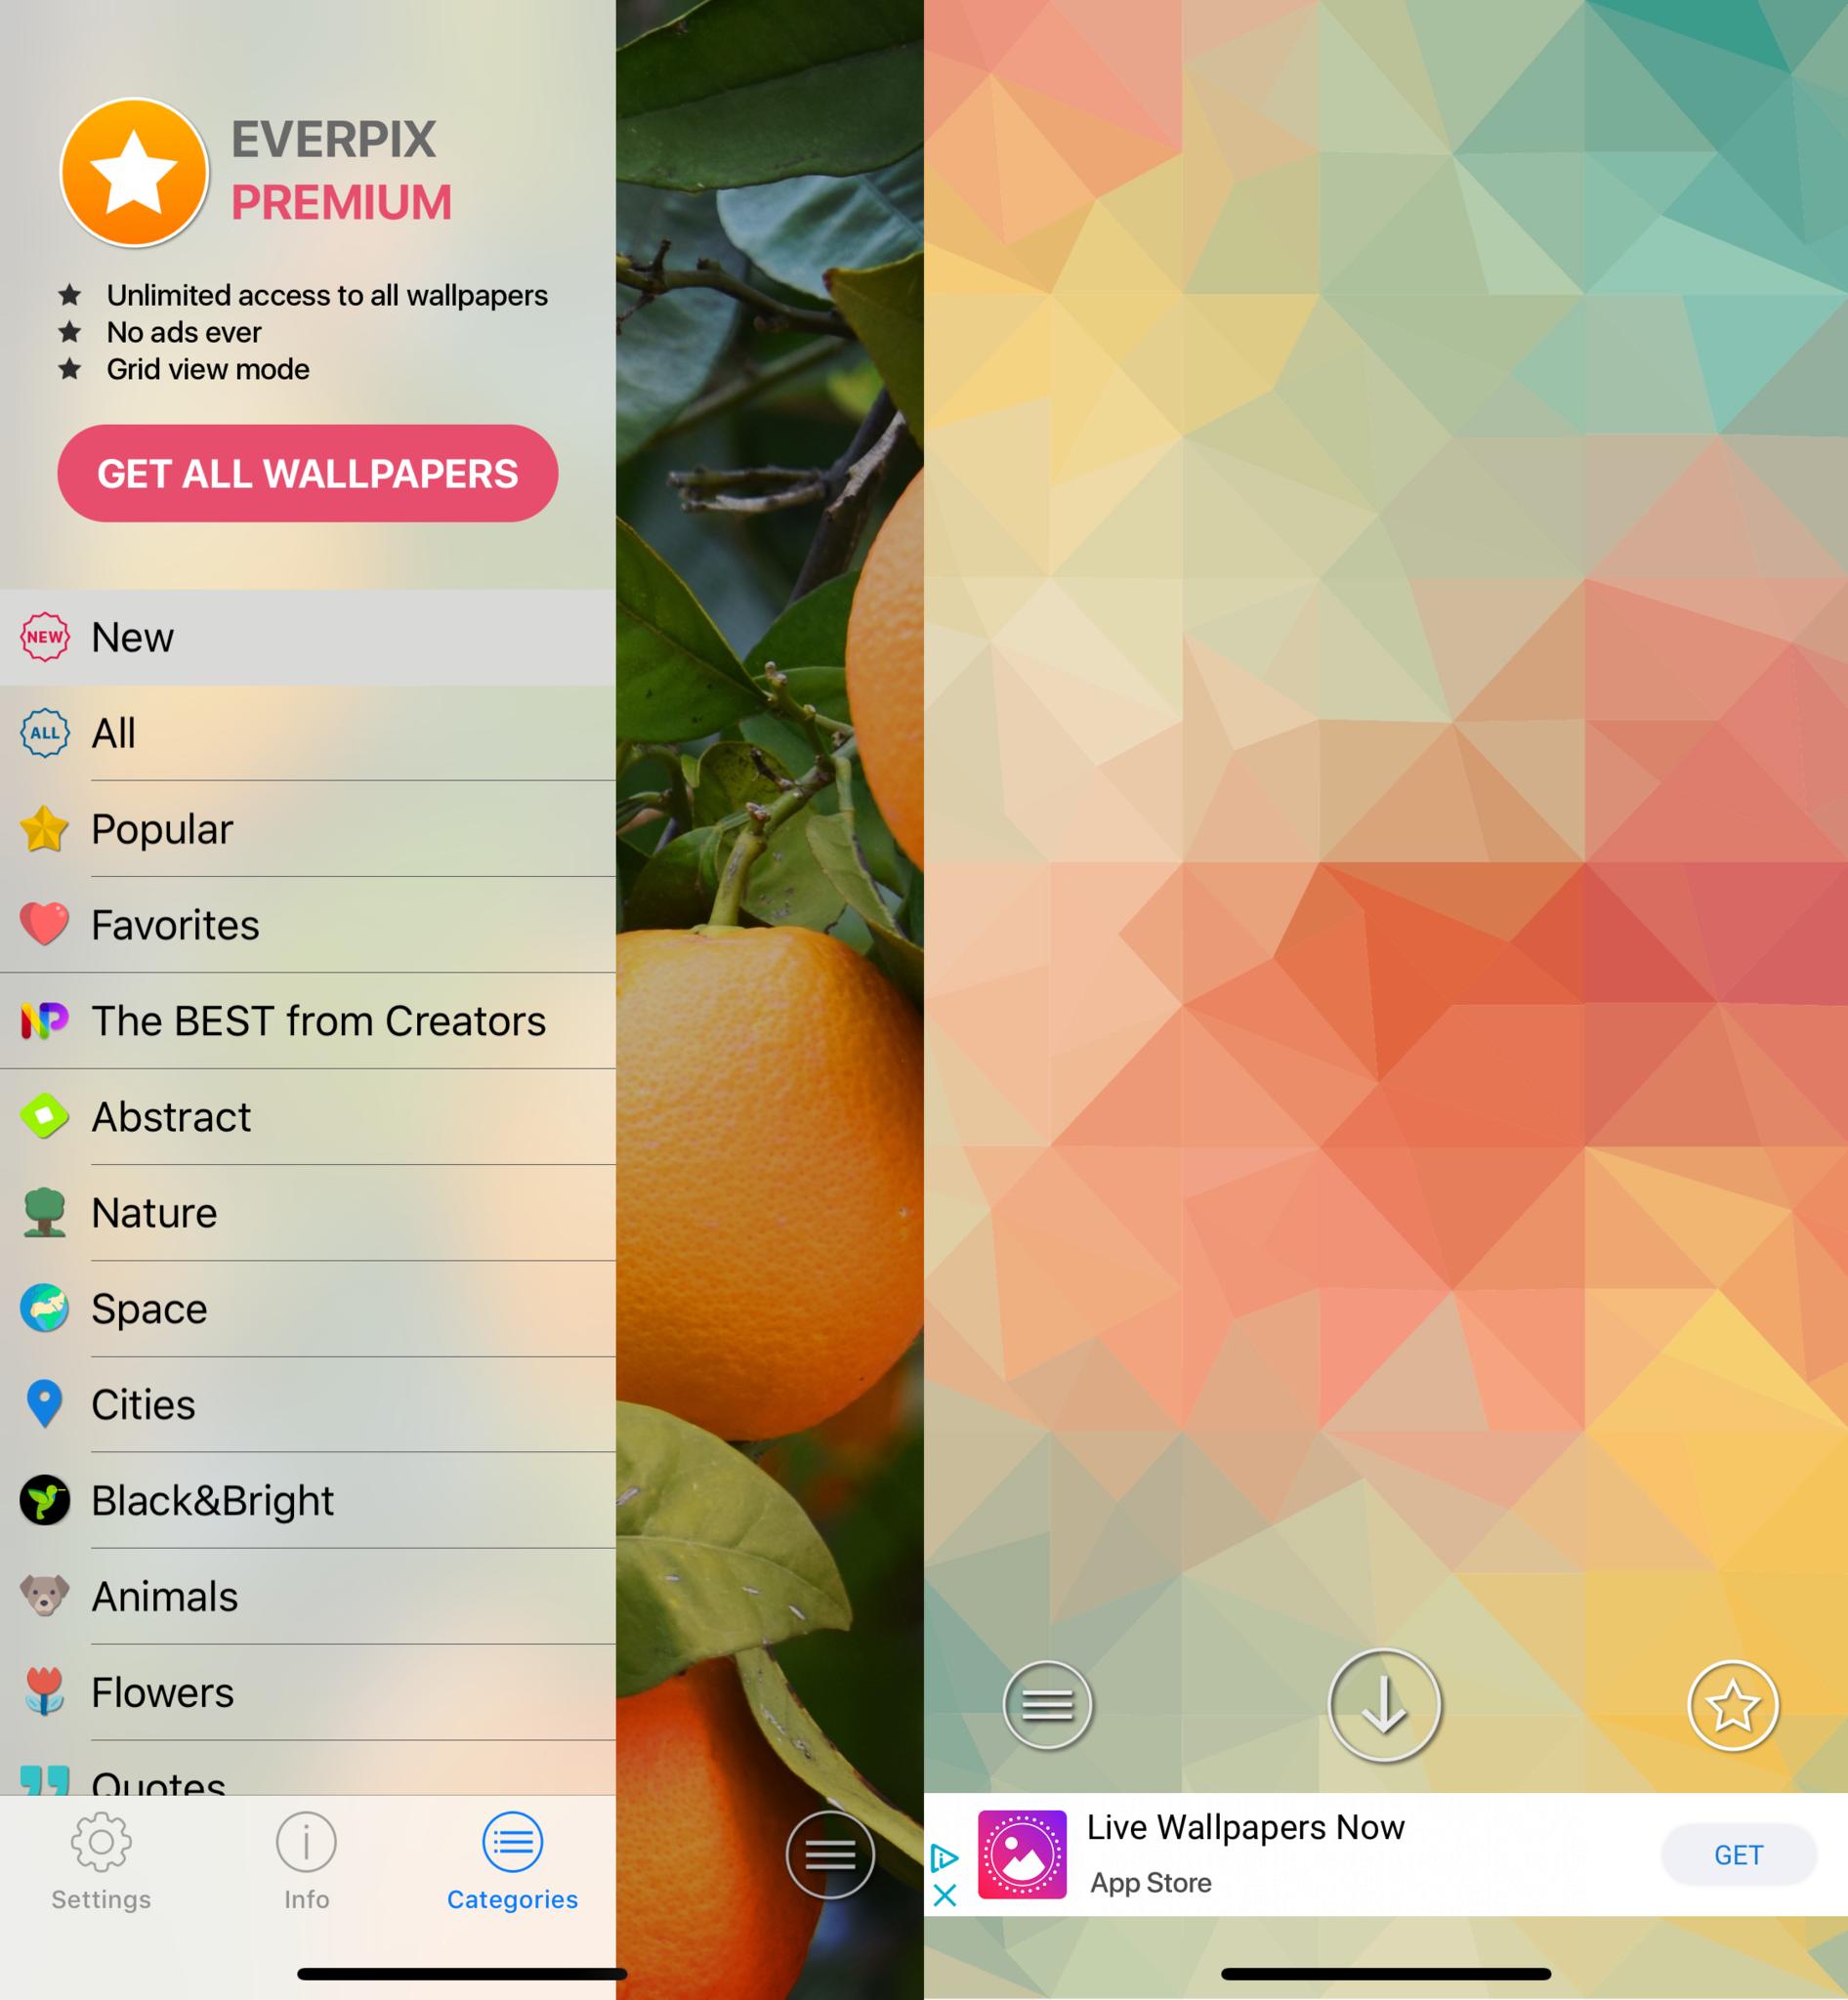 Best Wallpaper Apps For Iphone And Ipad Imore Images, Photos, Reviews